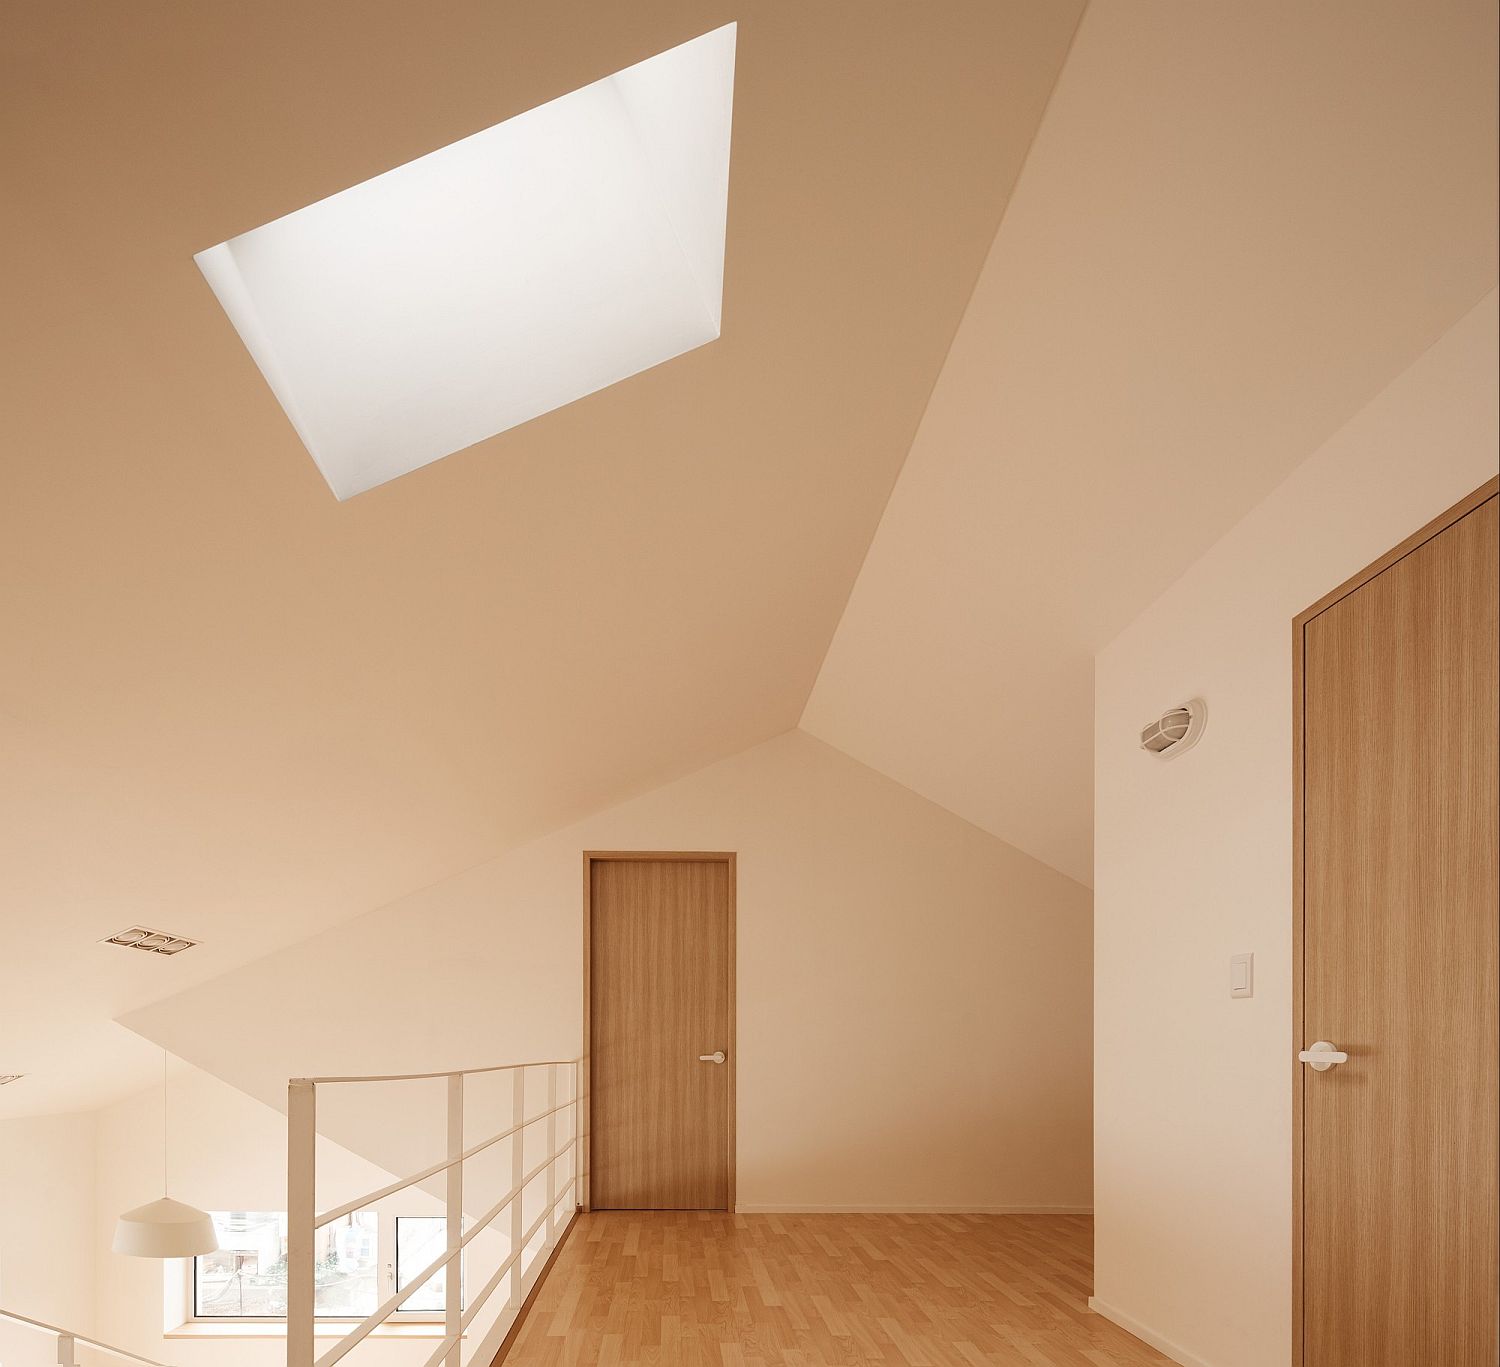 Skylight-brings-ample-natural-light-into-the-house